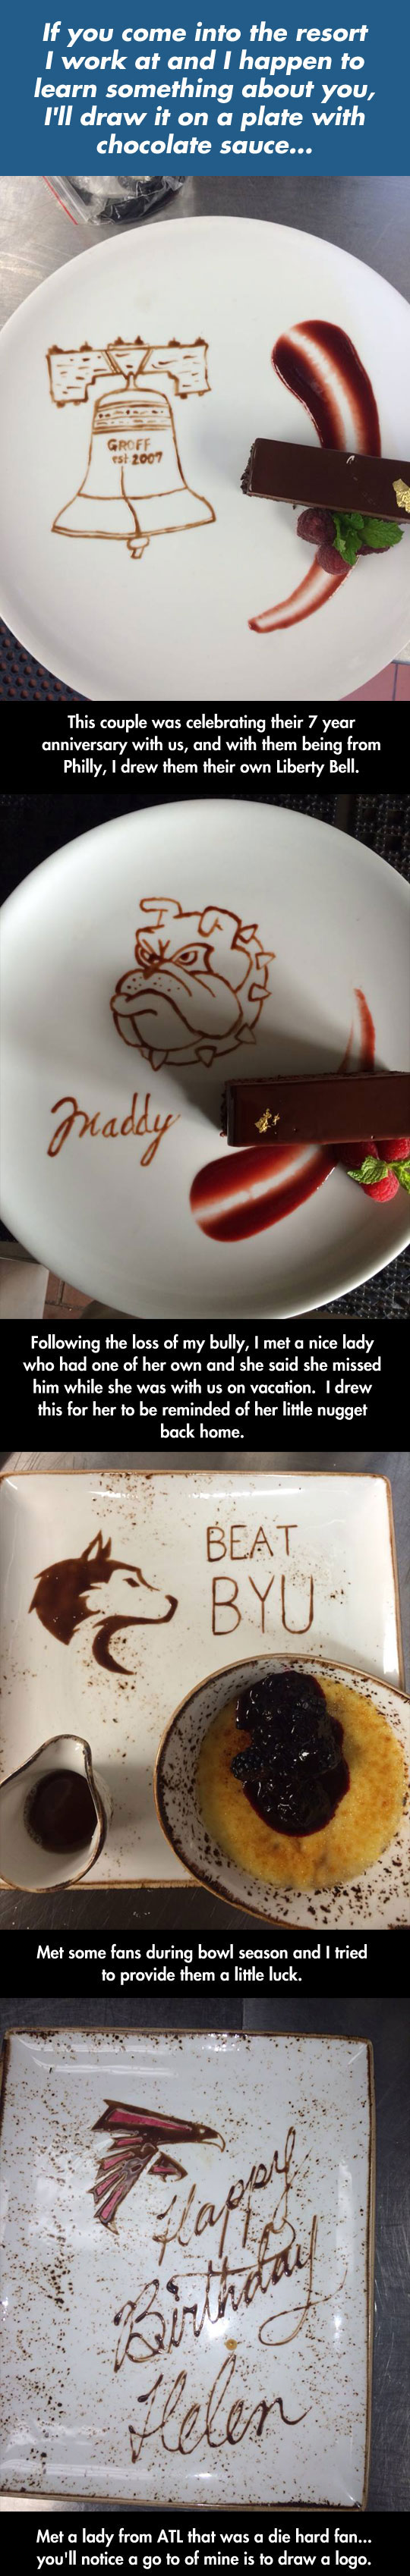 The Great Chocolate Artist